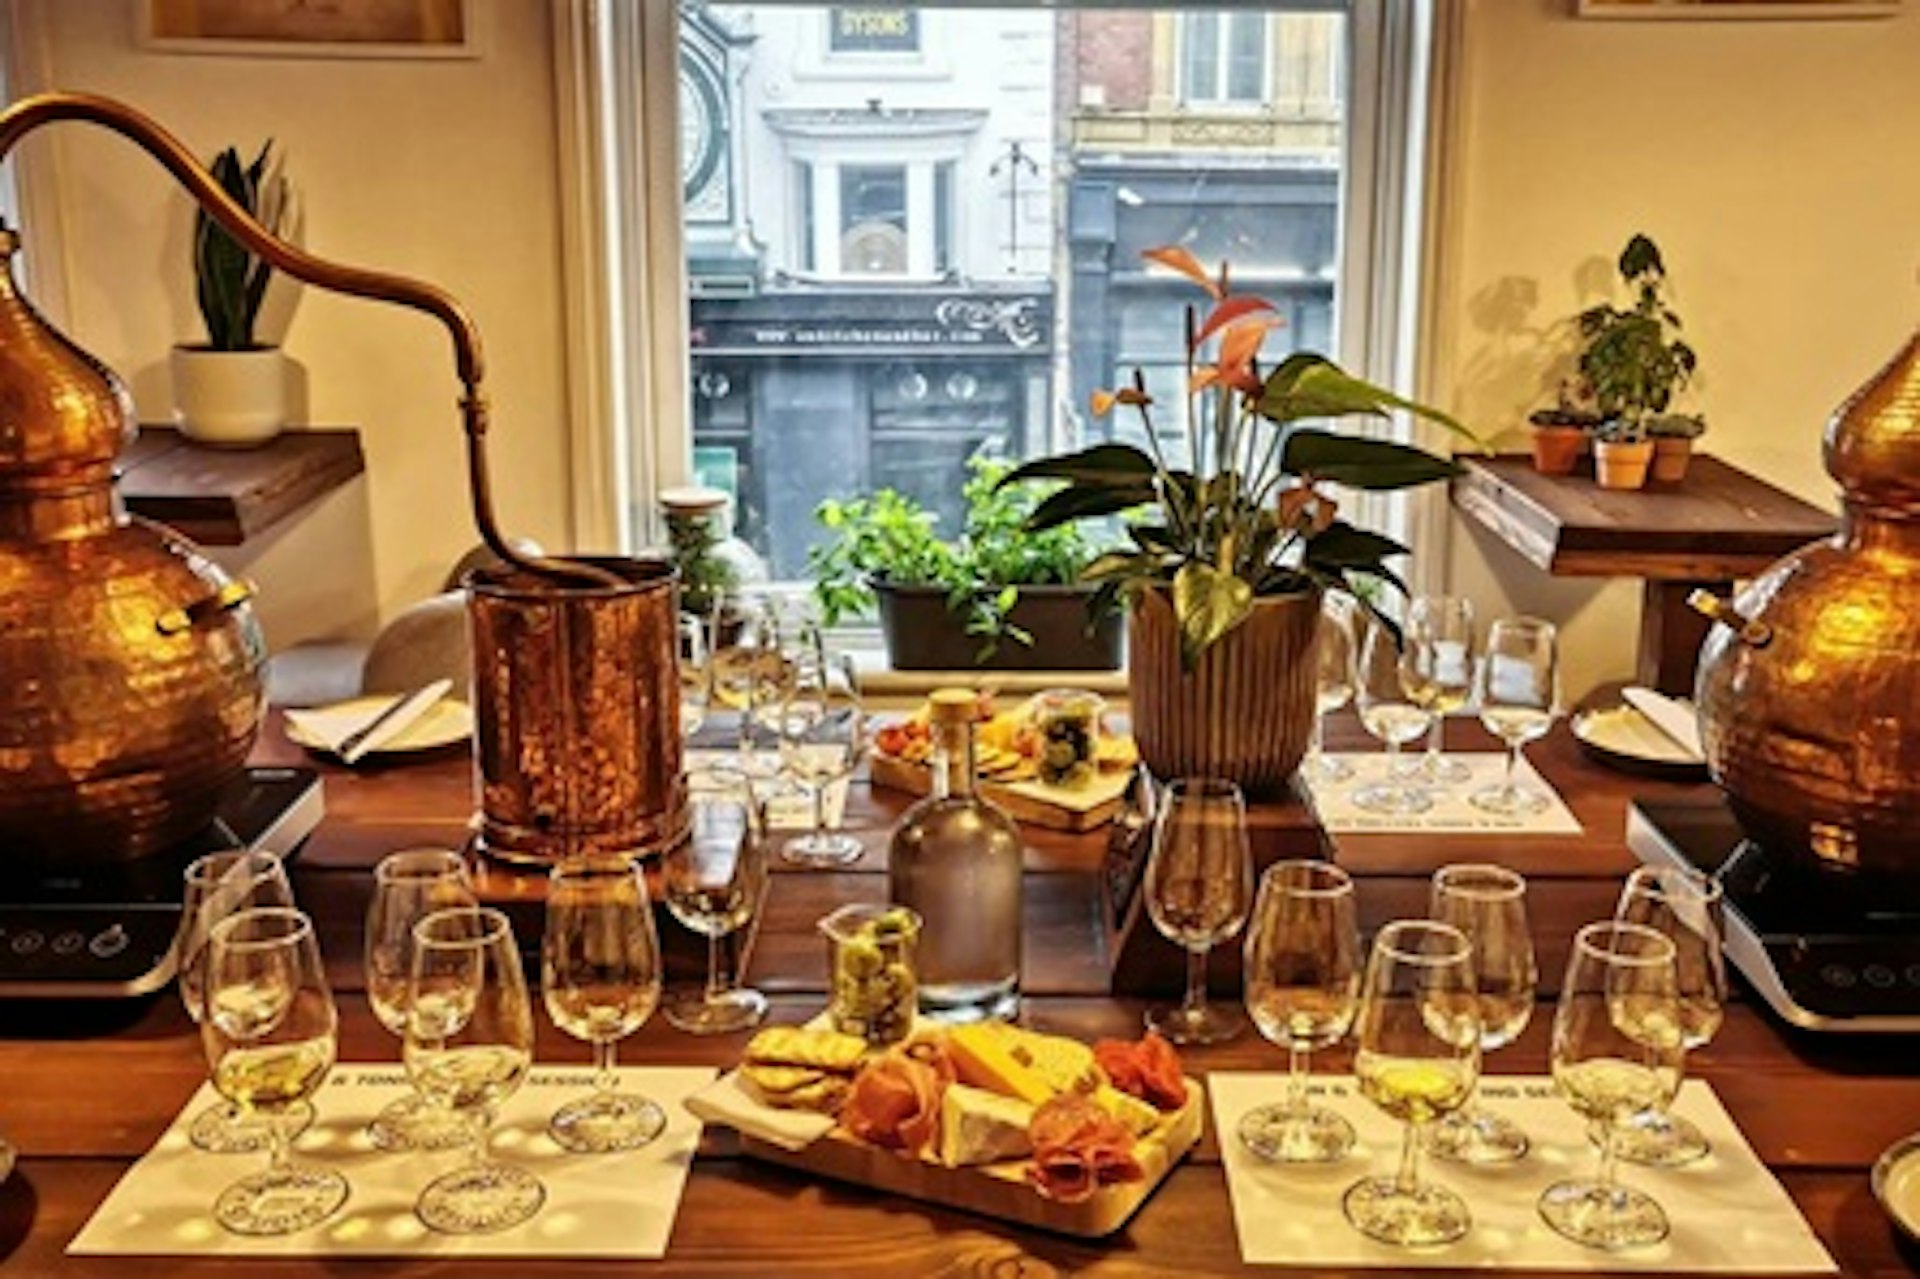 Gin and Tonic Tasting Experience for Two at Liquor Studio 4